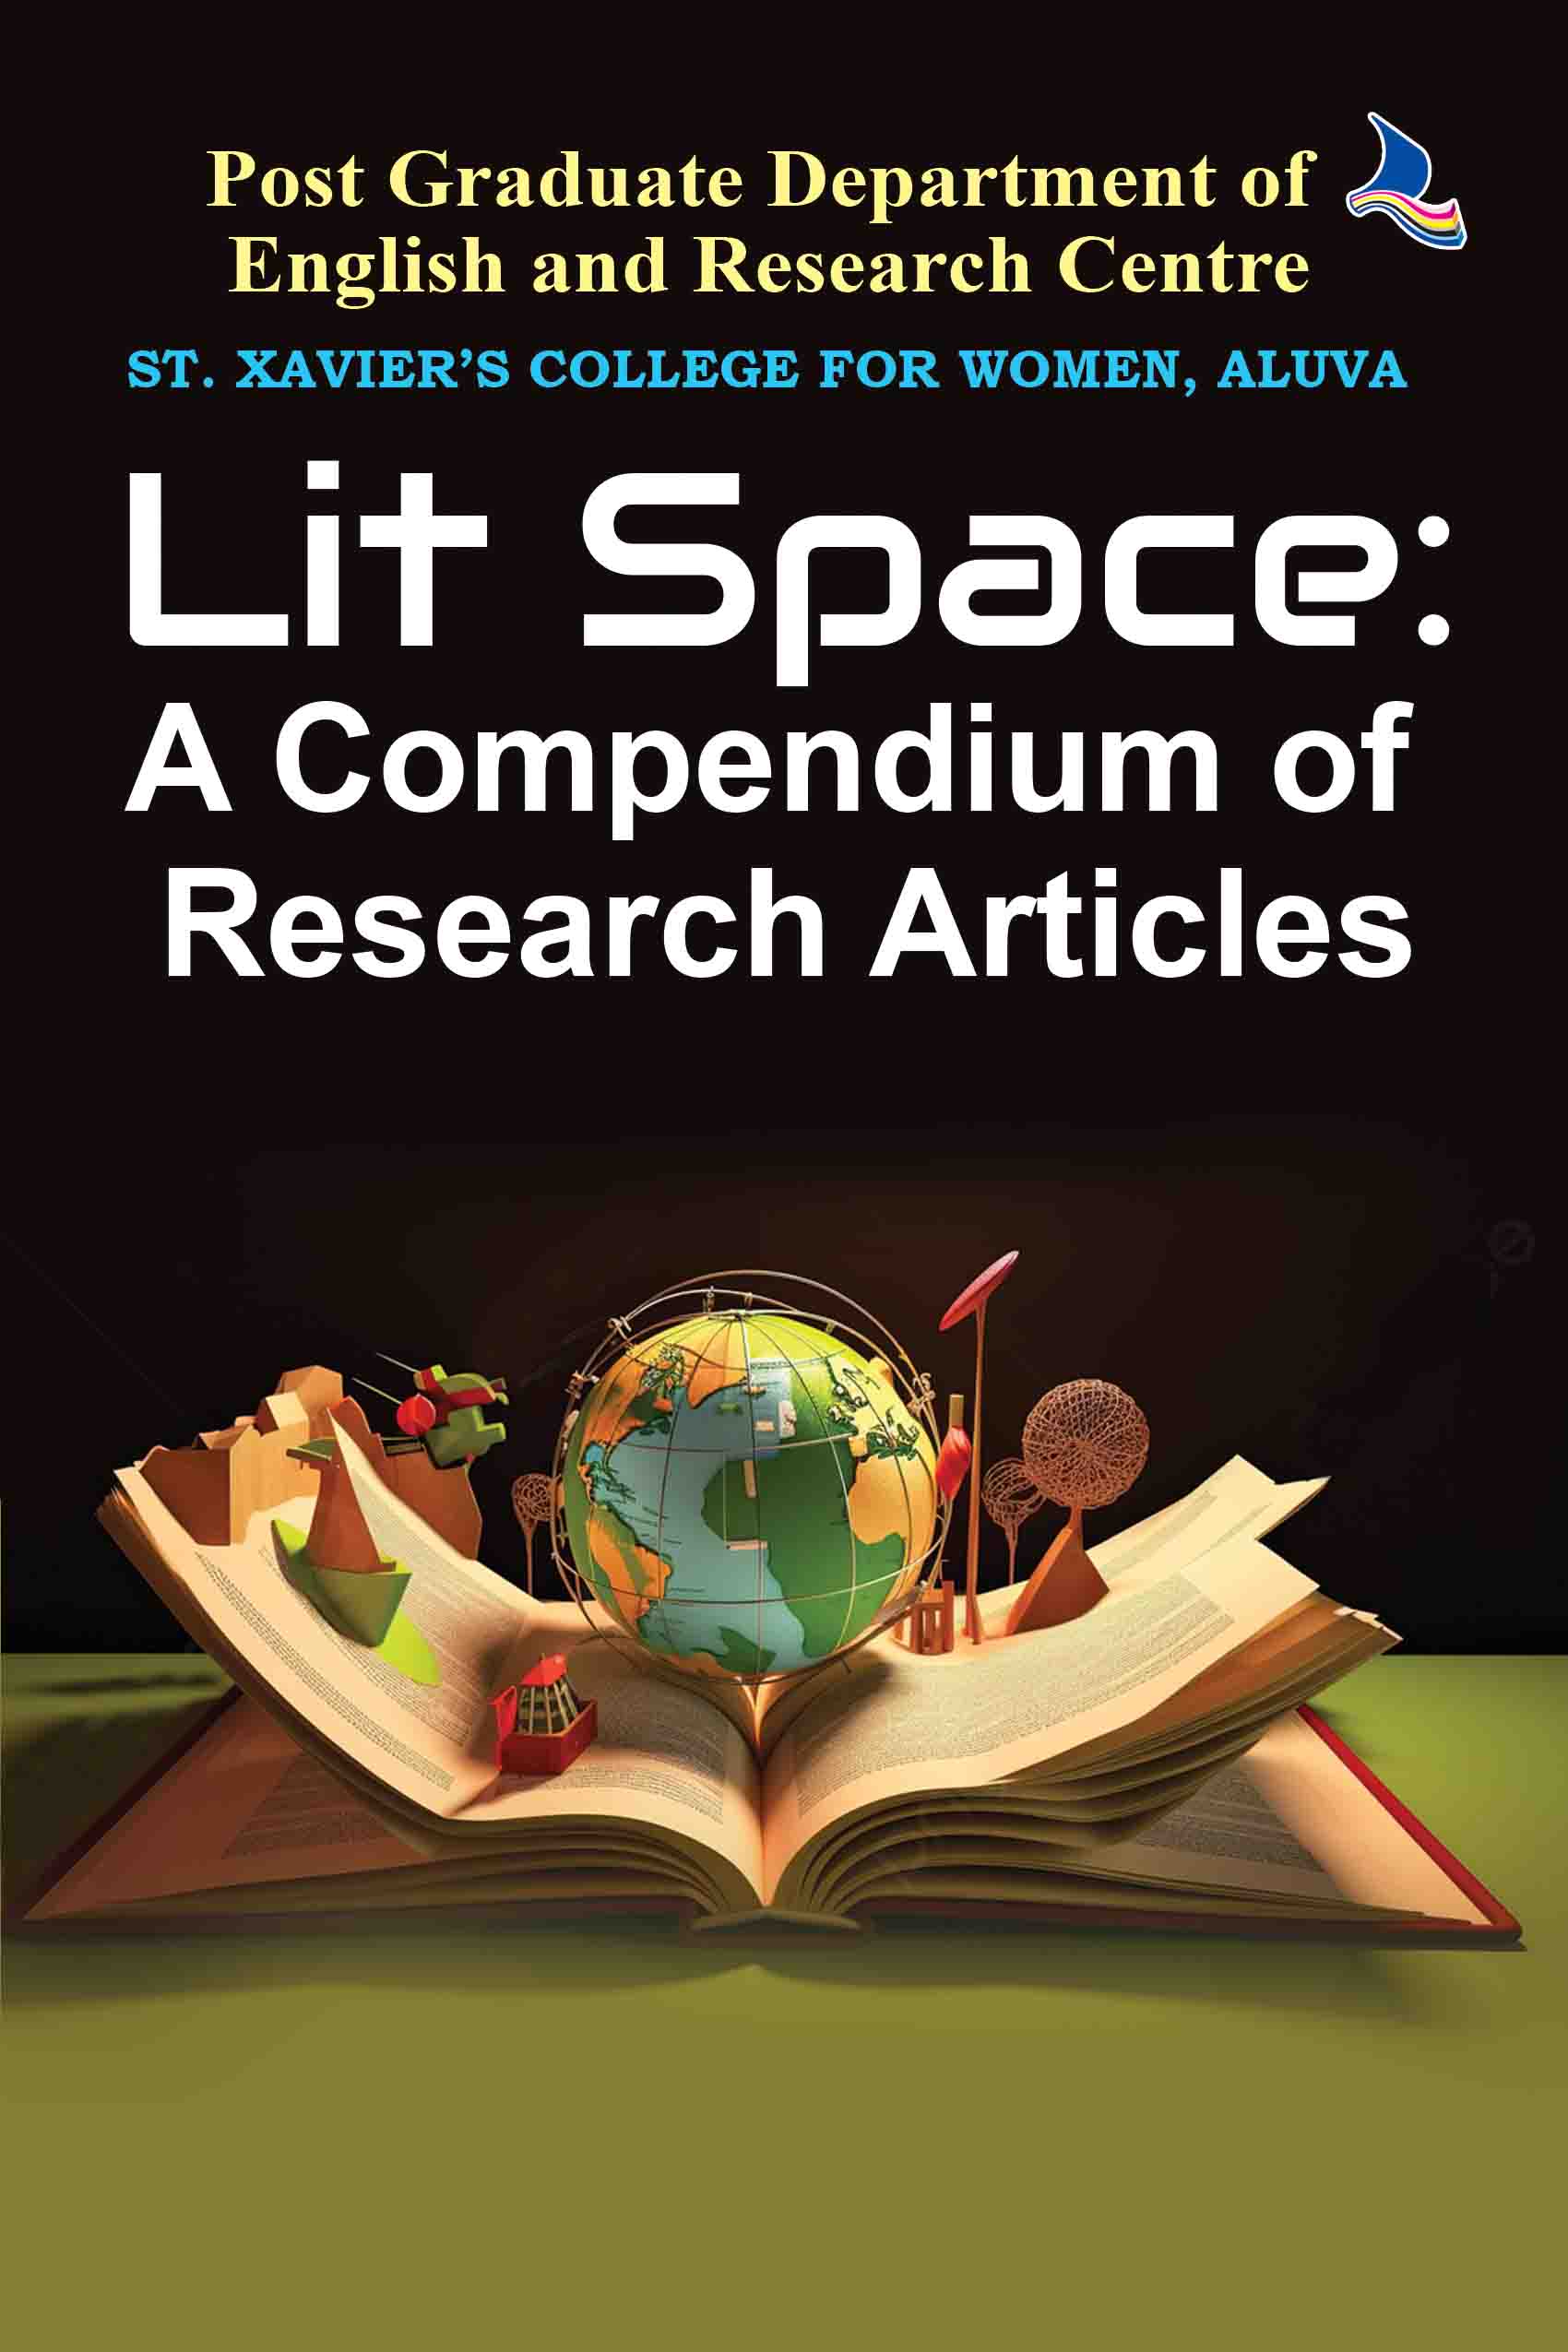 Lit Space: A Compendium of Research Articles